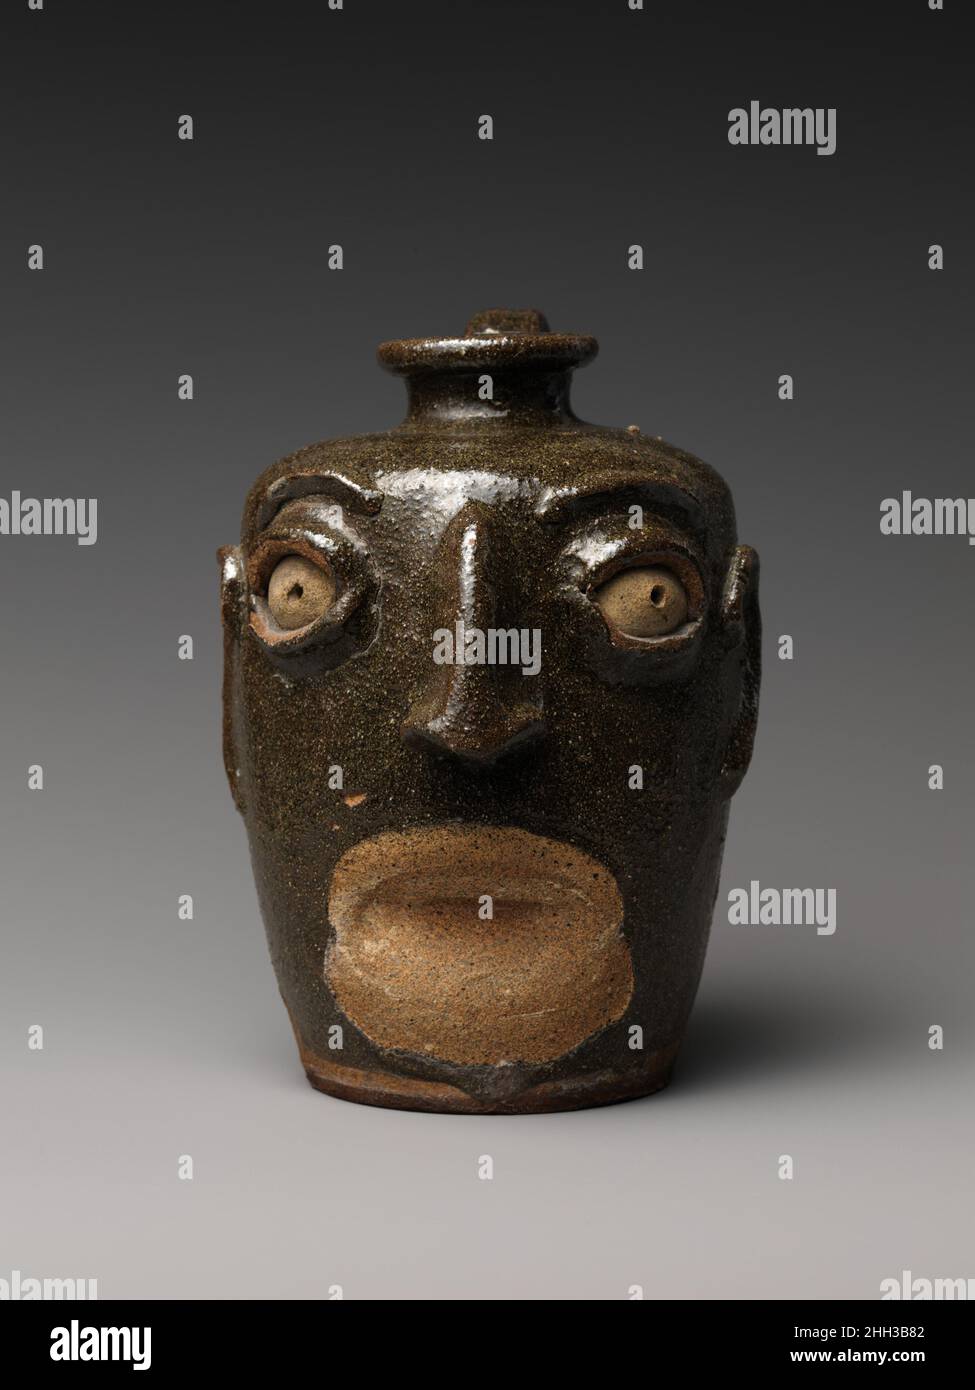 Face Jug ca. 1860–80 Unidentified Edgefield District potter Face jugs were made by African American slaves and freedmen working in potteries in the Edgefield District of South Carolina, an area of significant stoneware production in the nineteenth century. The distinctive features of the jugs, notably the kaolin inserts for the eyes, relate in style and material to ritualistic objects of the Congo and Angola region of western Africa, whence many slaves in South Carolina descended. This jug is missing its teeth and lips—a common loss, sometimes occurring as early as the firing stage.. Face Jug. Stock Photo